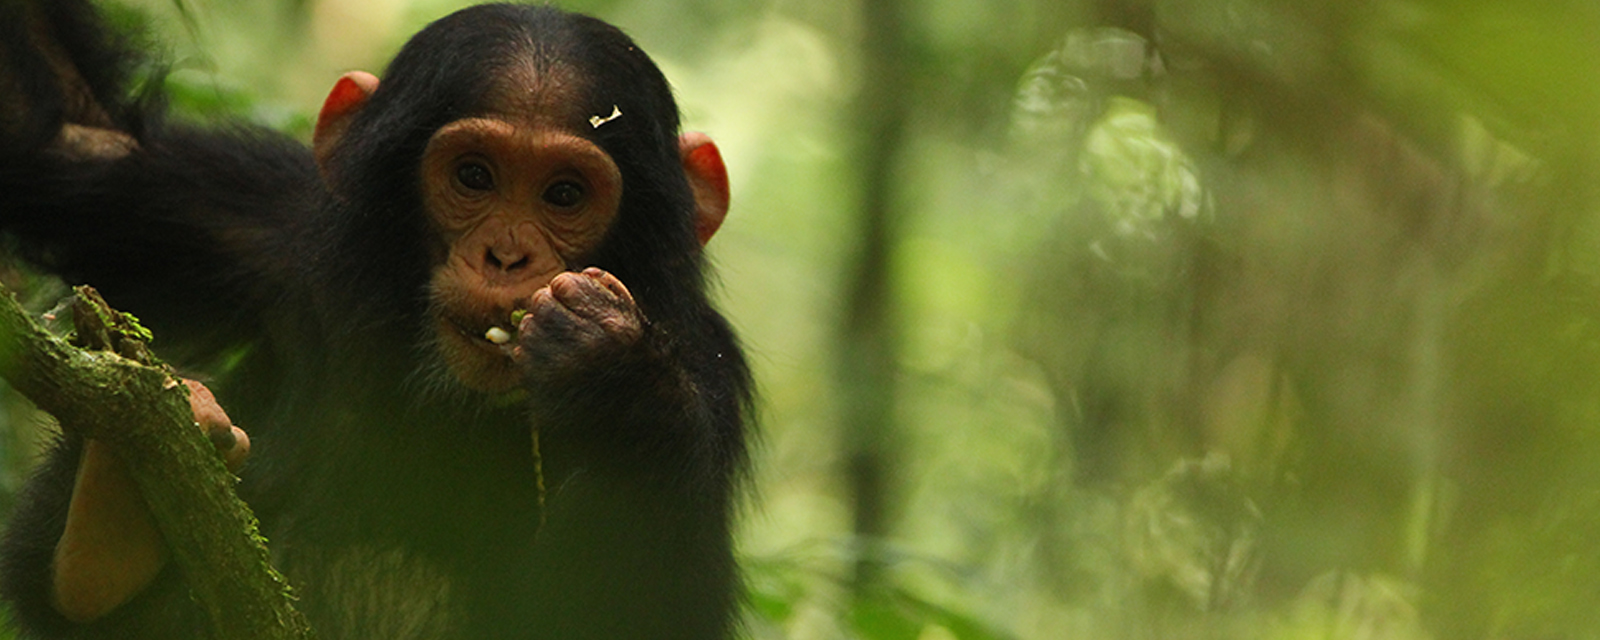 Infant chimpanzee eating greenery in the wild